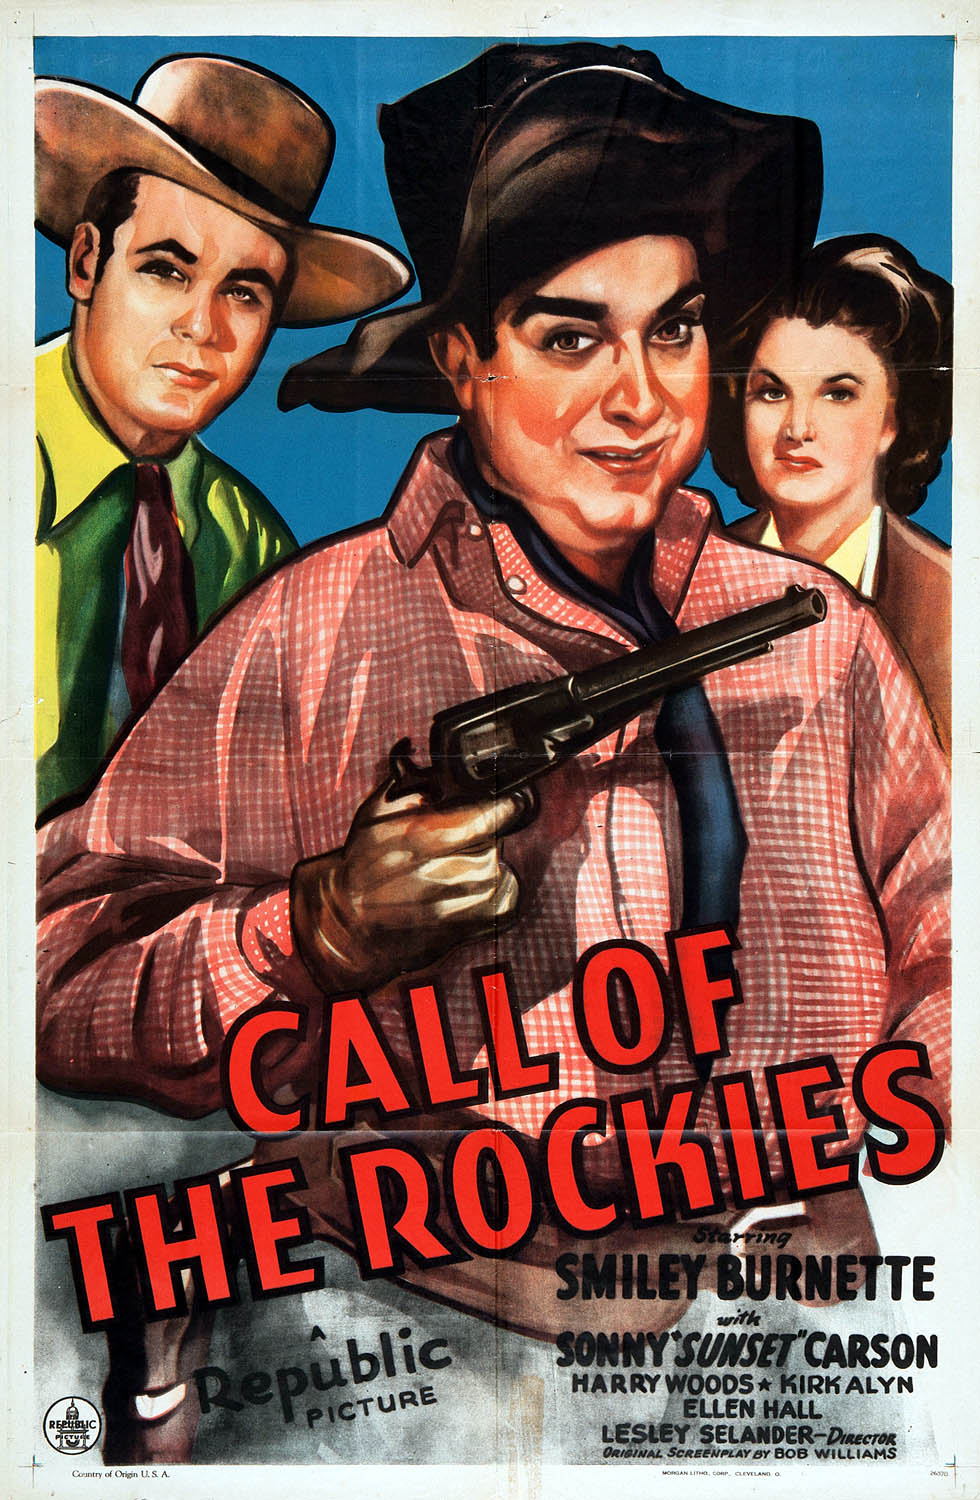 CALL OF THE ROCKIES